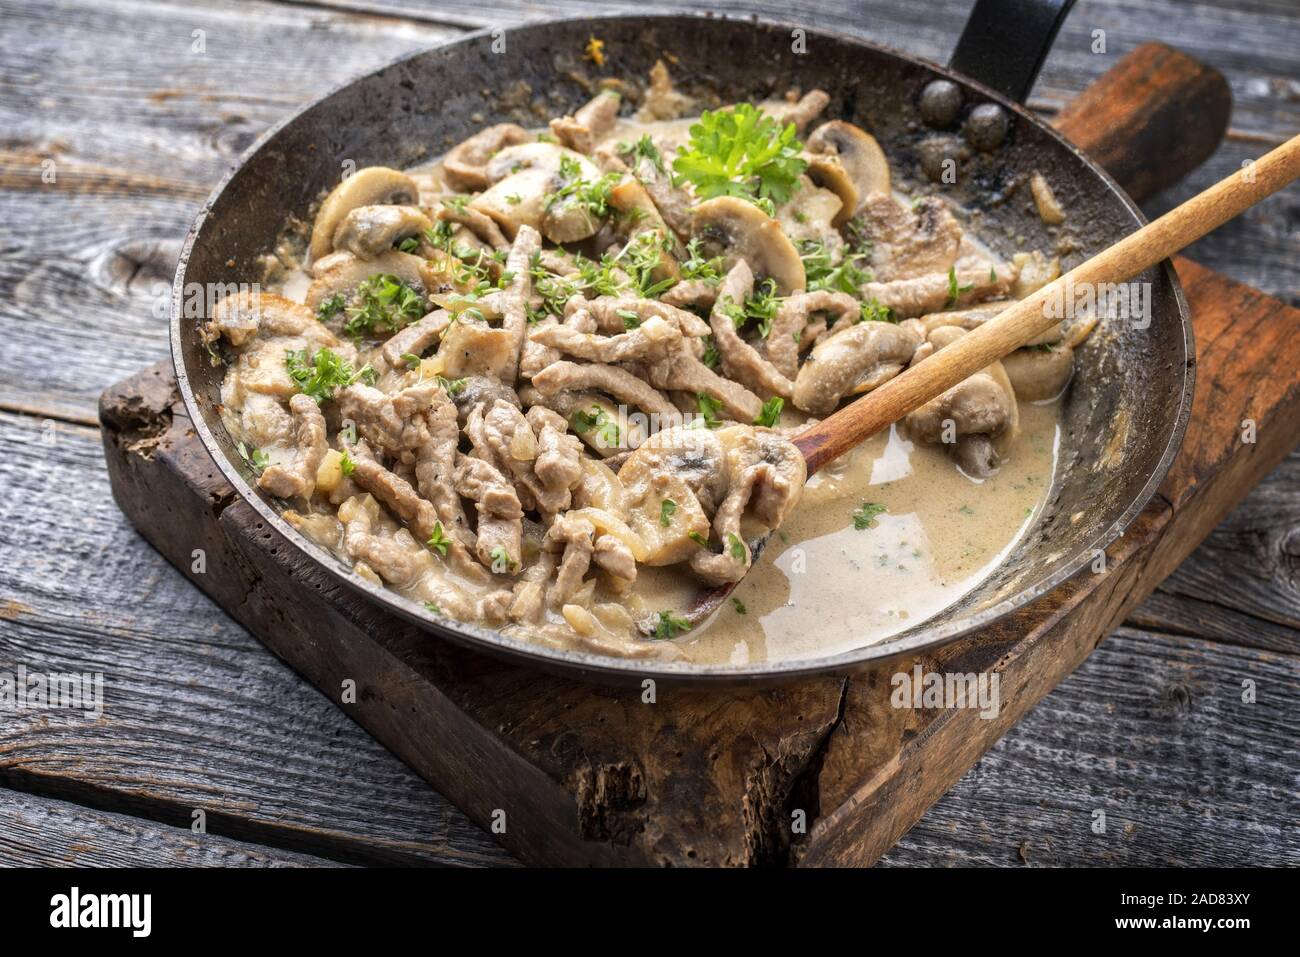 Page 2 - Zurcher High Resolution Stock Photography and Images - Alamy